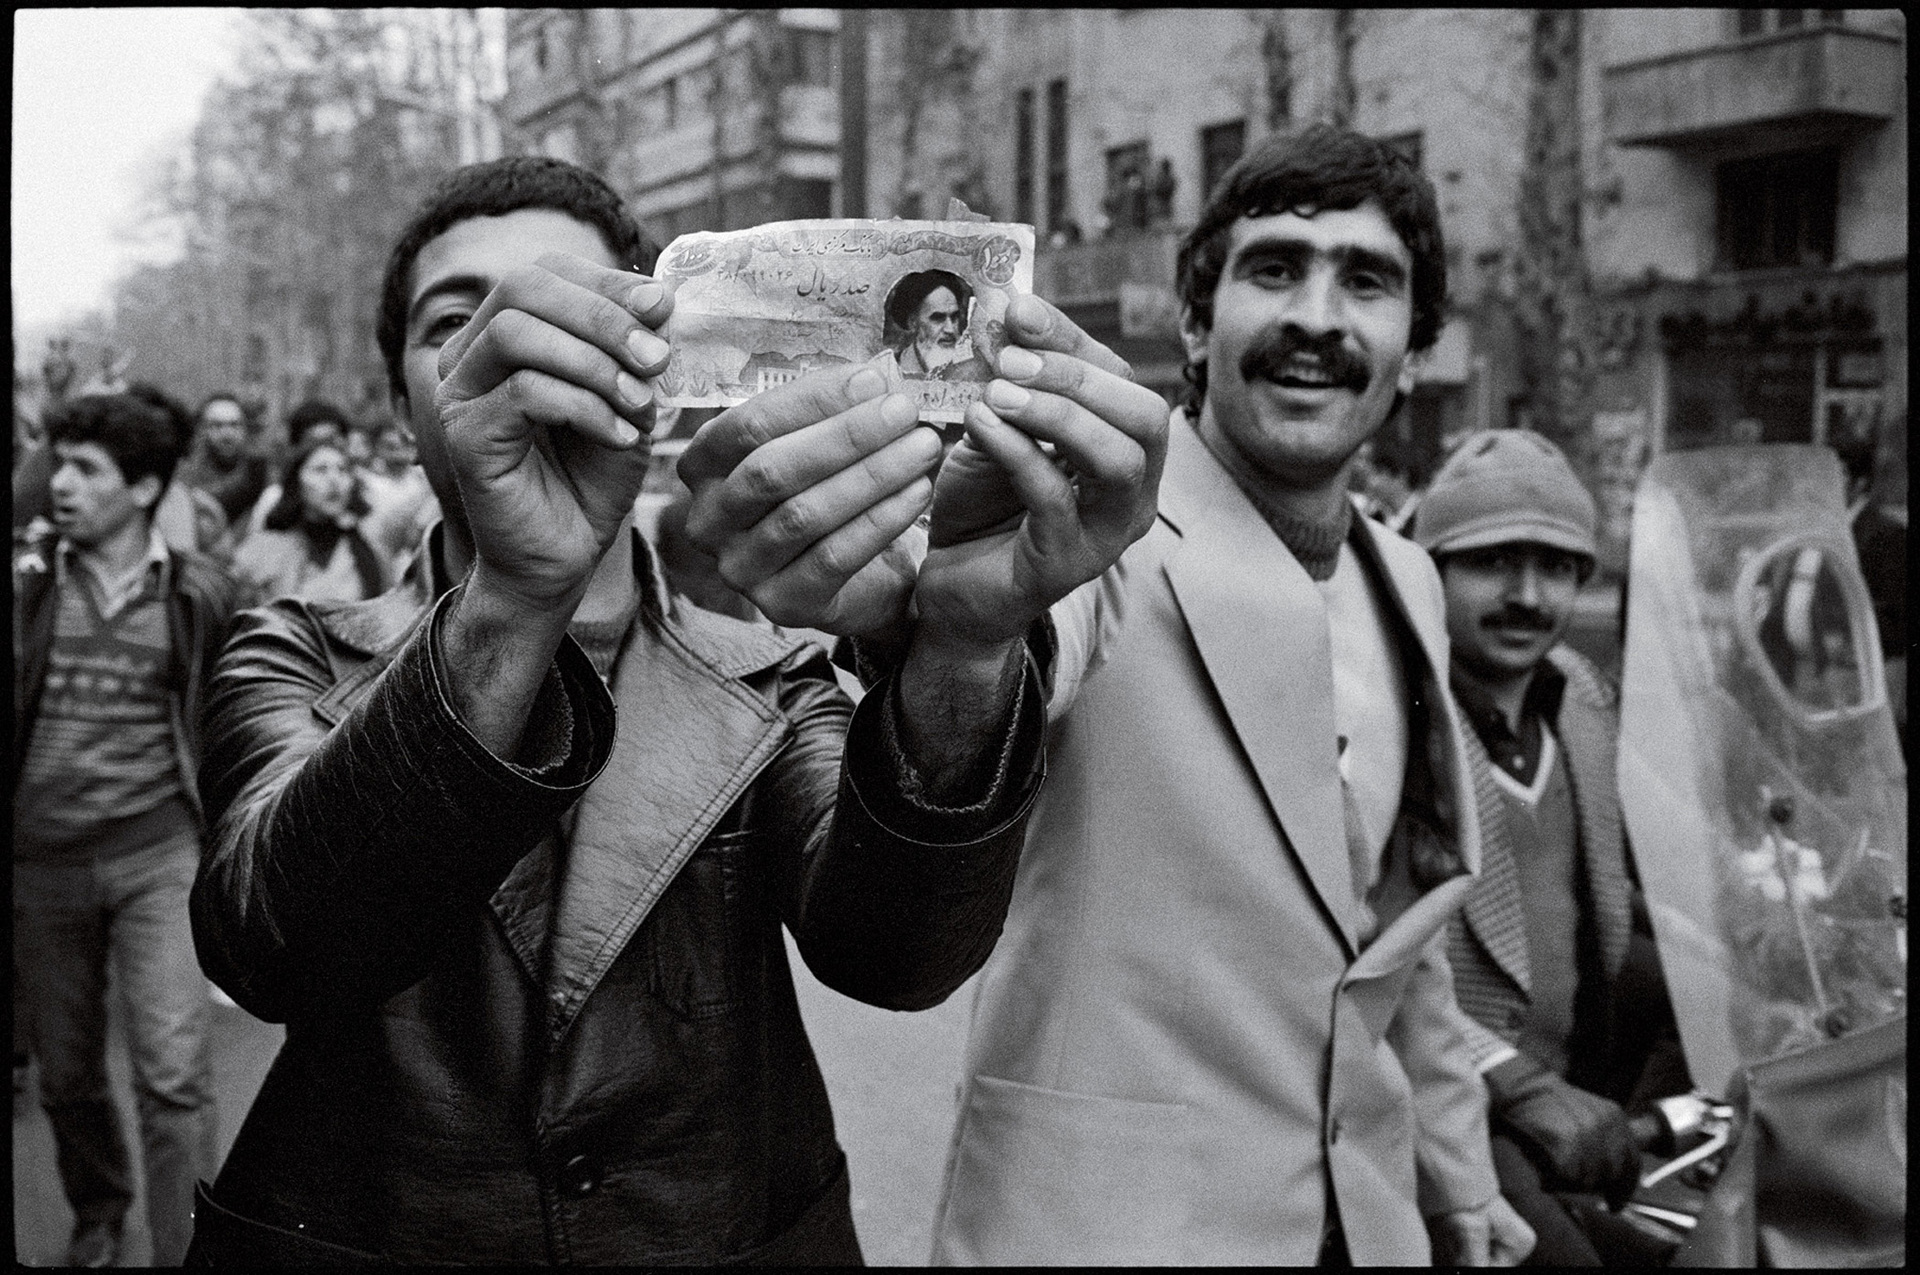 Tehran erupts in joy, with news of the Shah's departure.